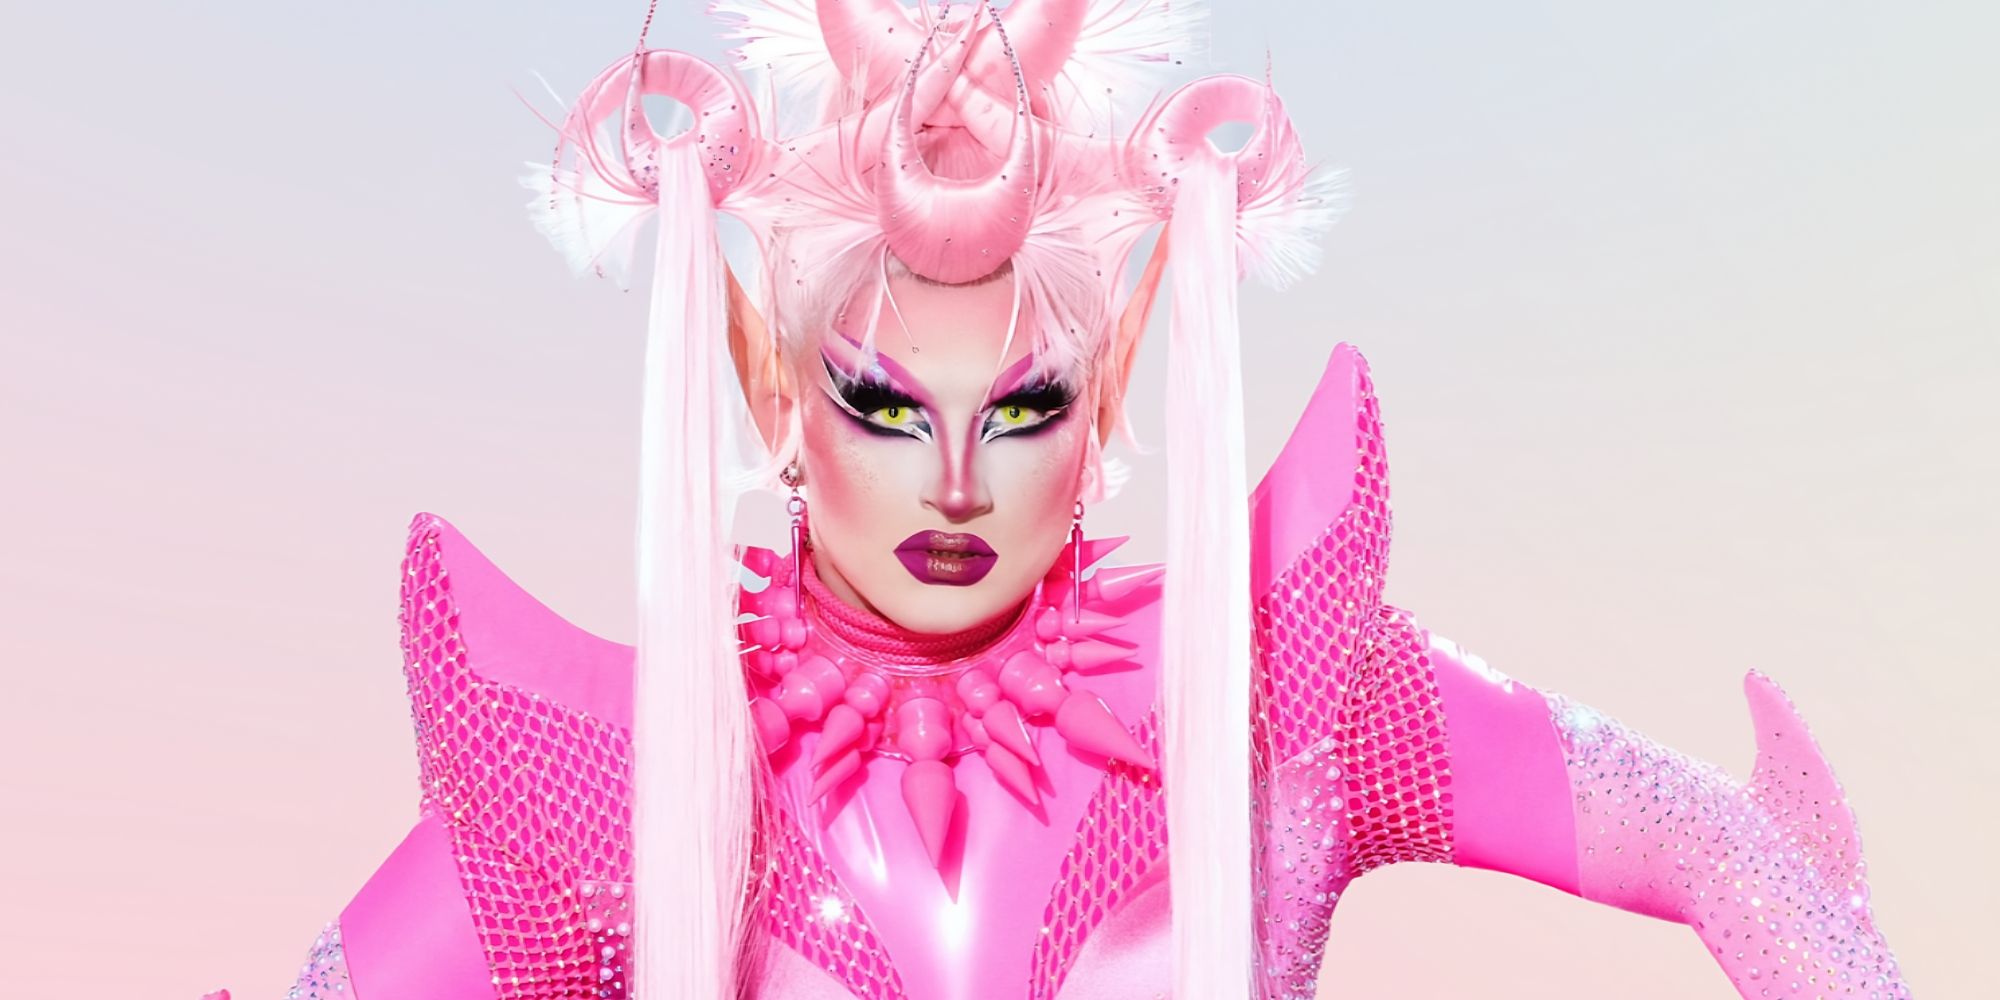 Irene Dubois From RuPaul's Drag Race Season 15 in an all-pink outfit with a serious expression